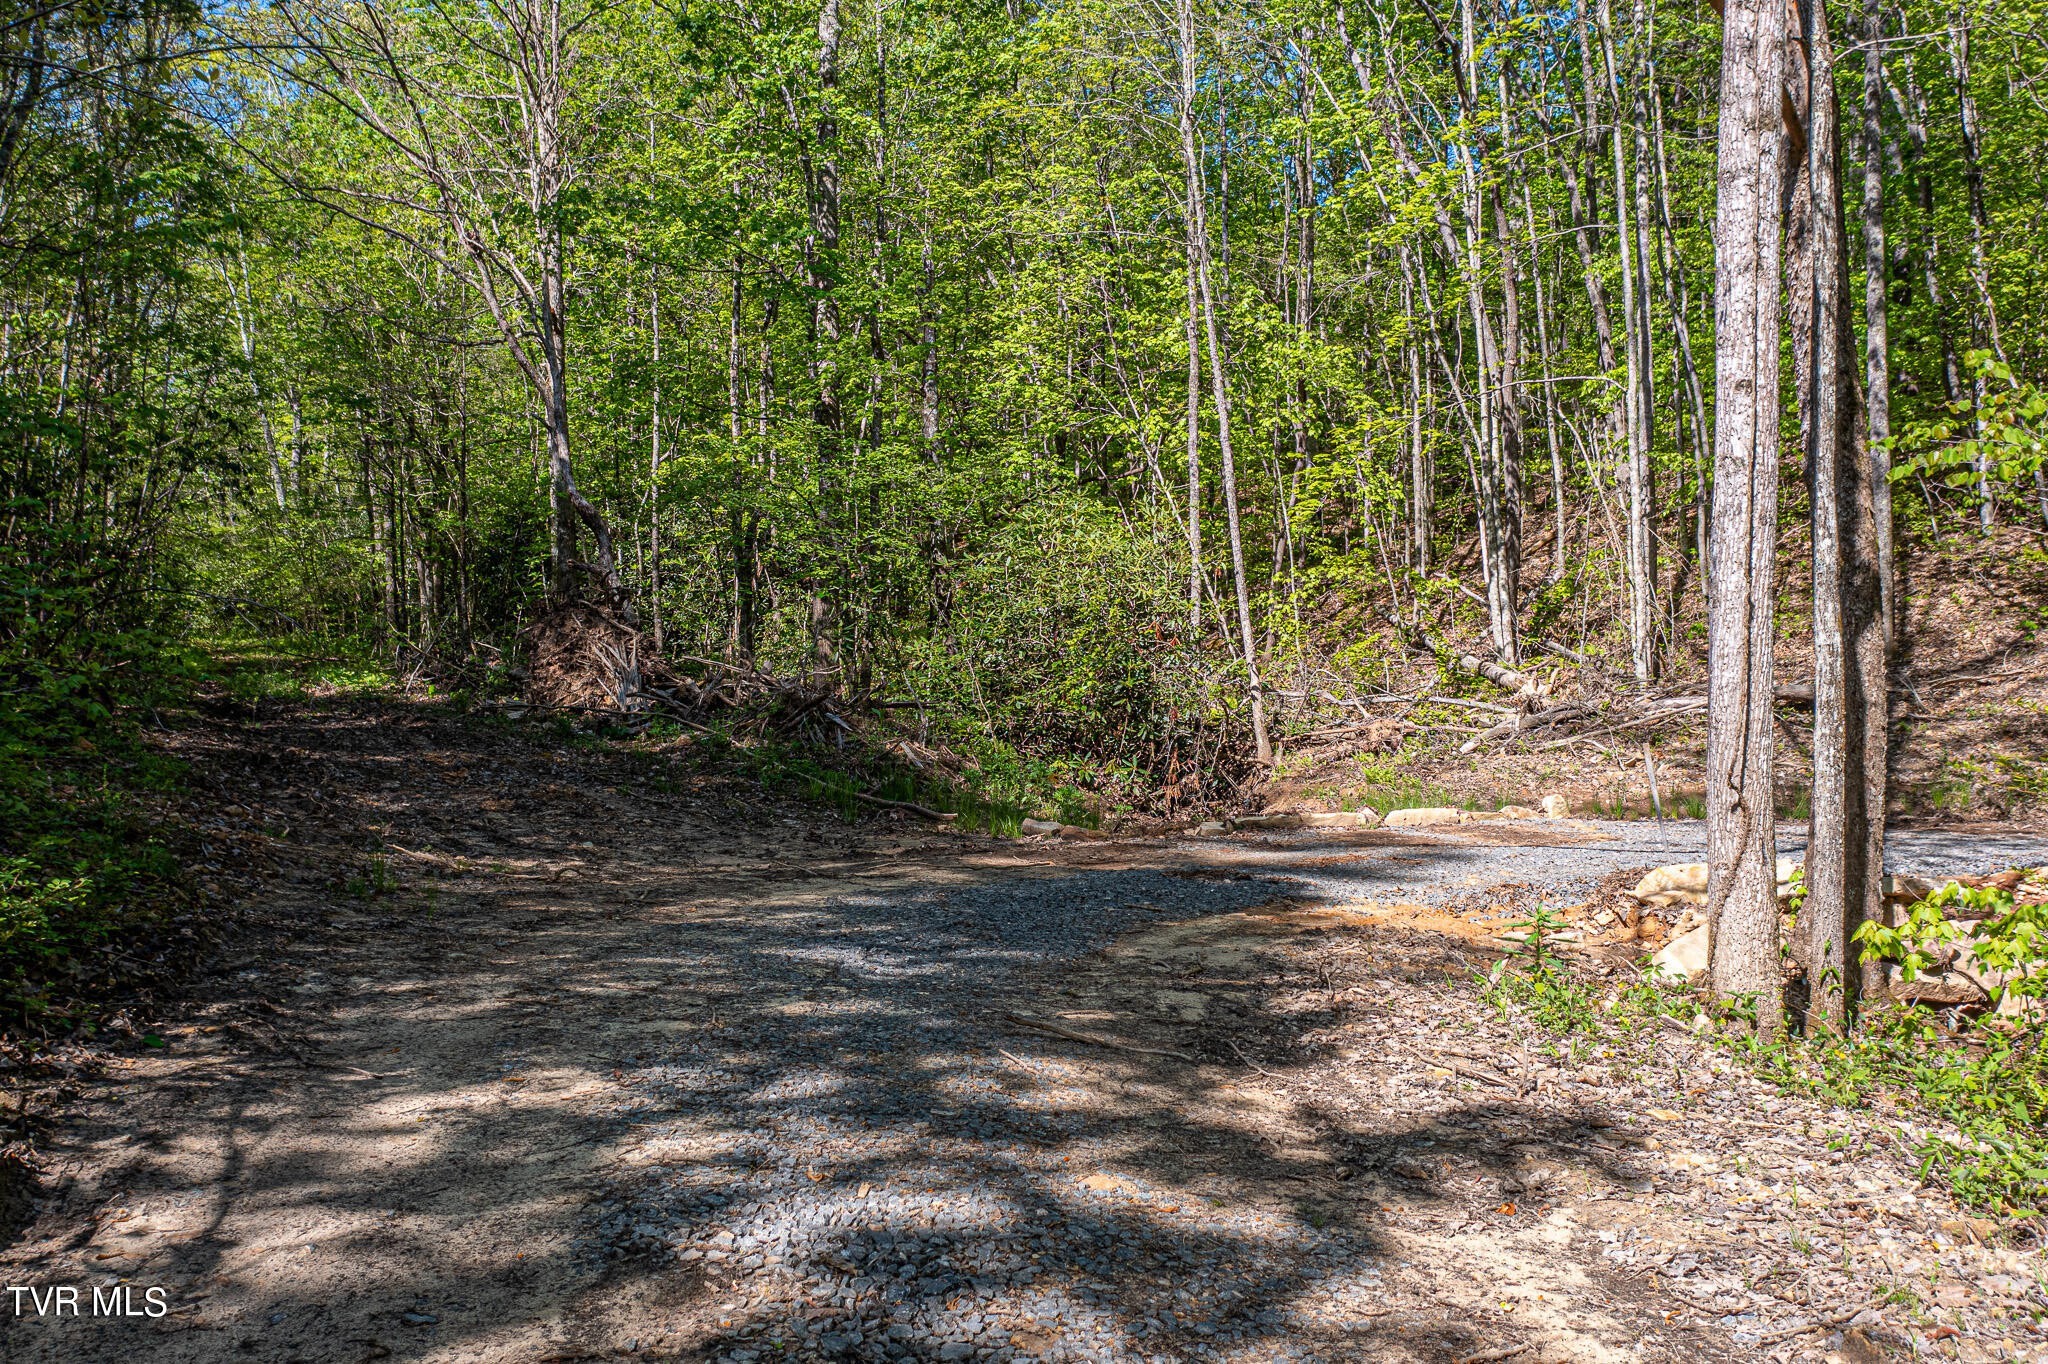 6. Tbd Seay Hollow Road